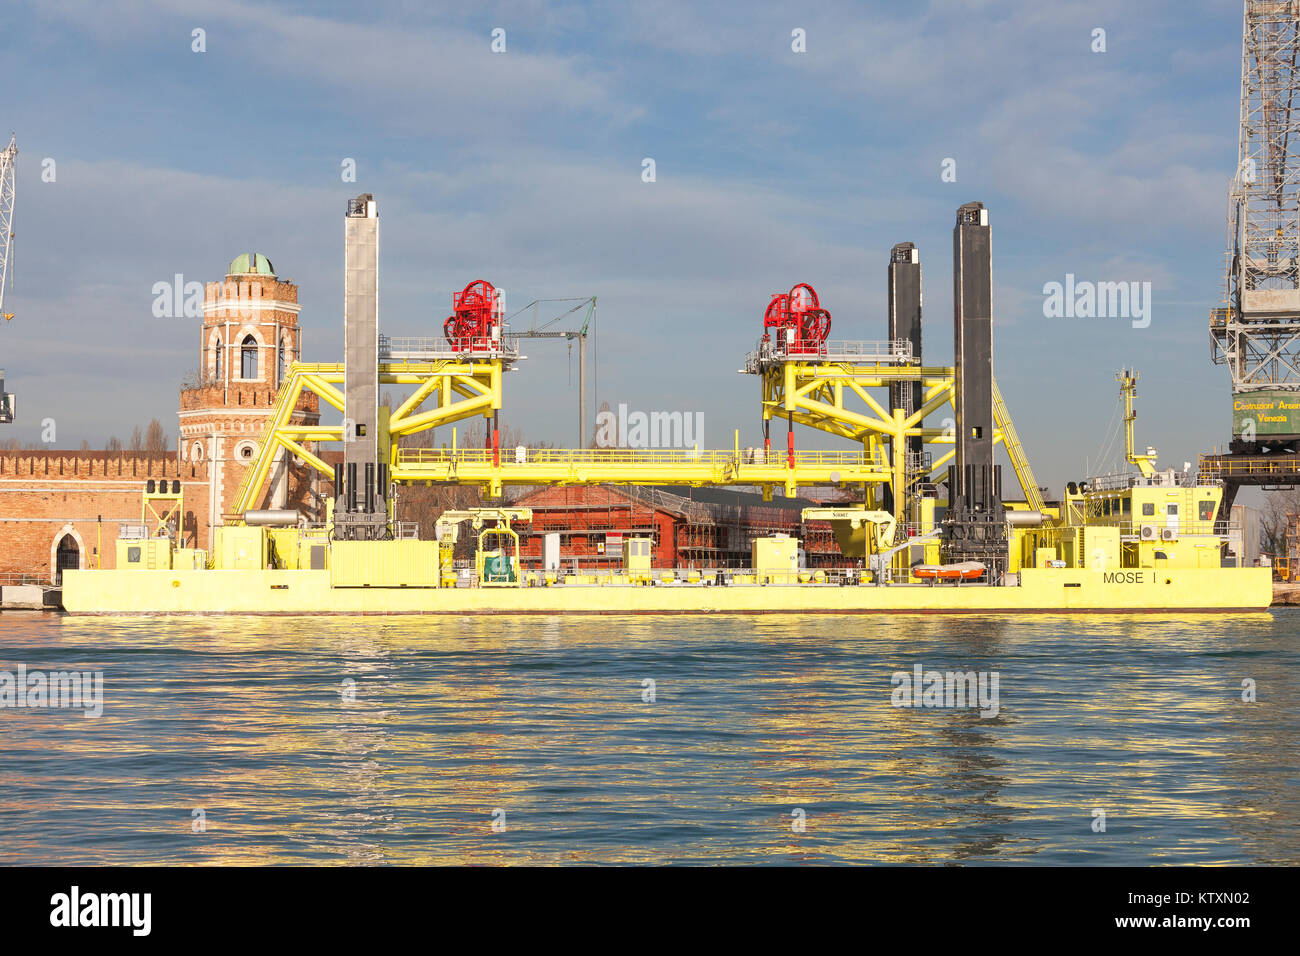 The MOSE 1 jack-up vessel for transporting the barriers designed to close the lagoon to prevent flooding during Acqua Alta, Venice, Italy. Stock Photo